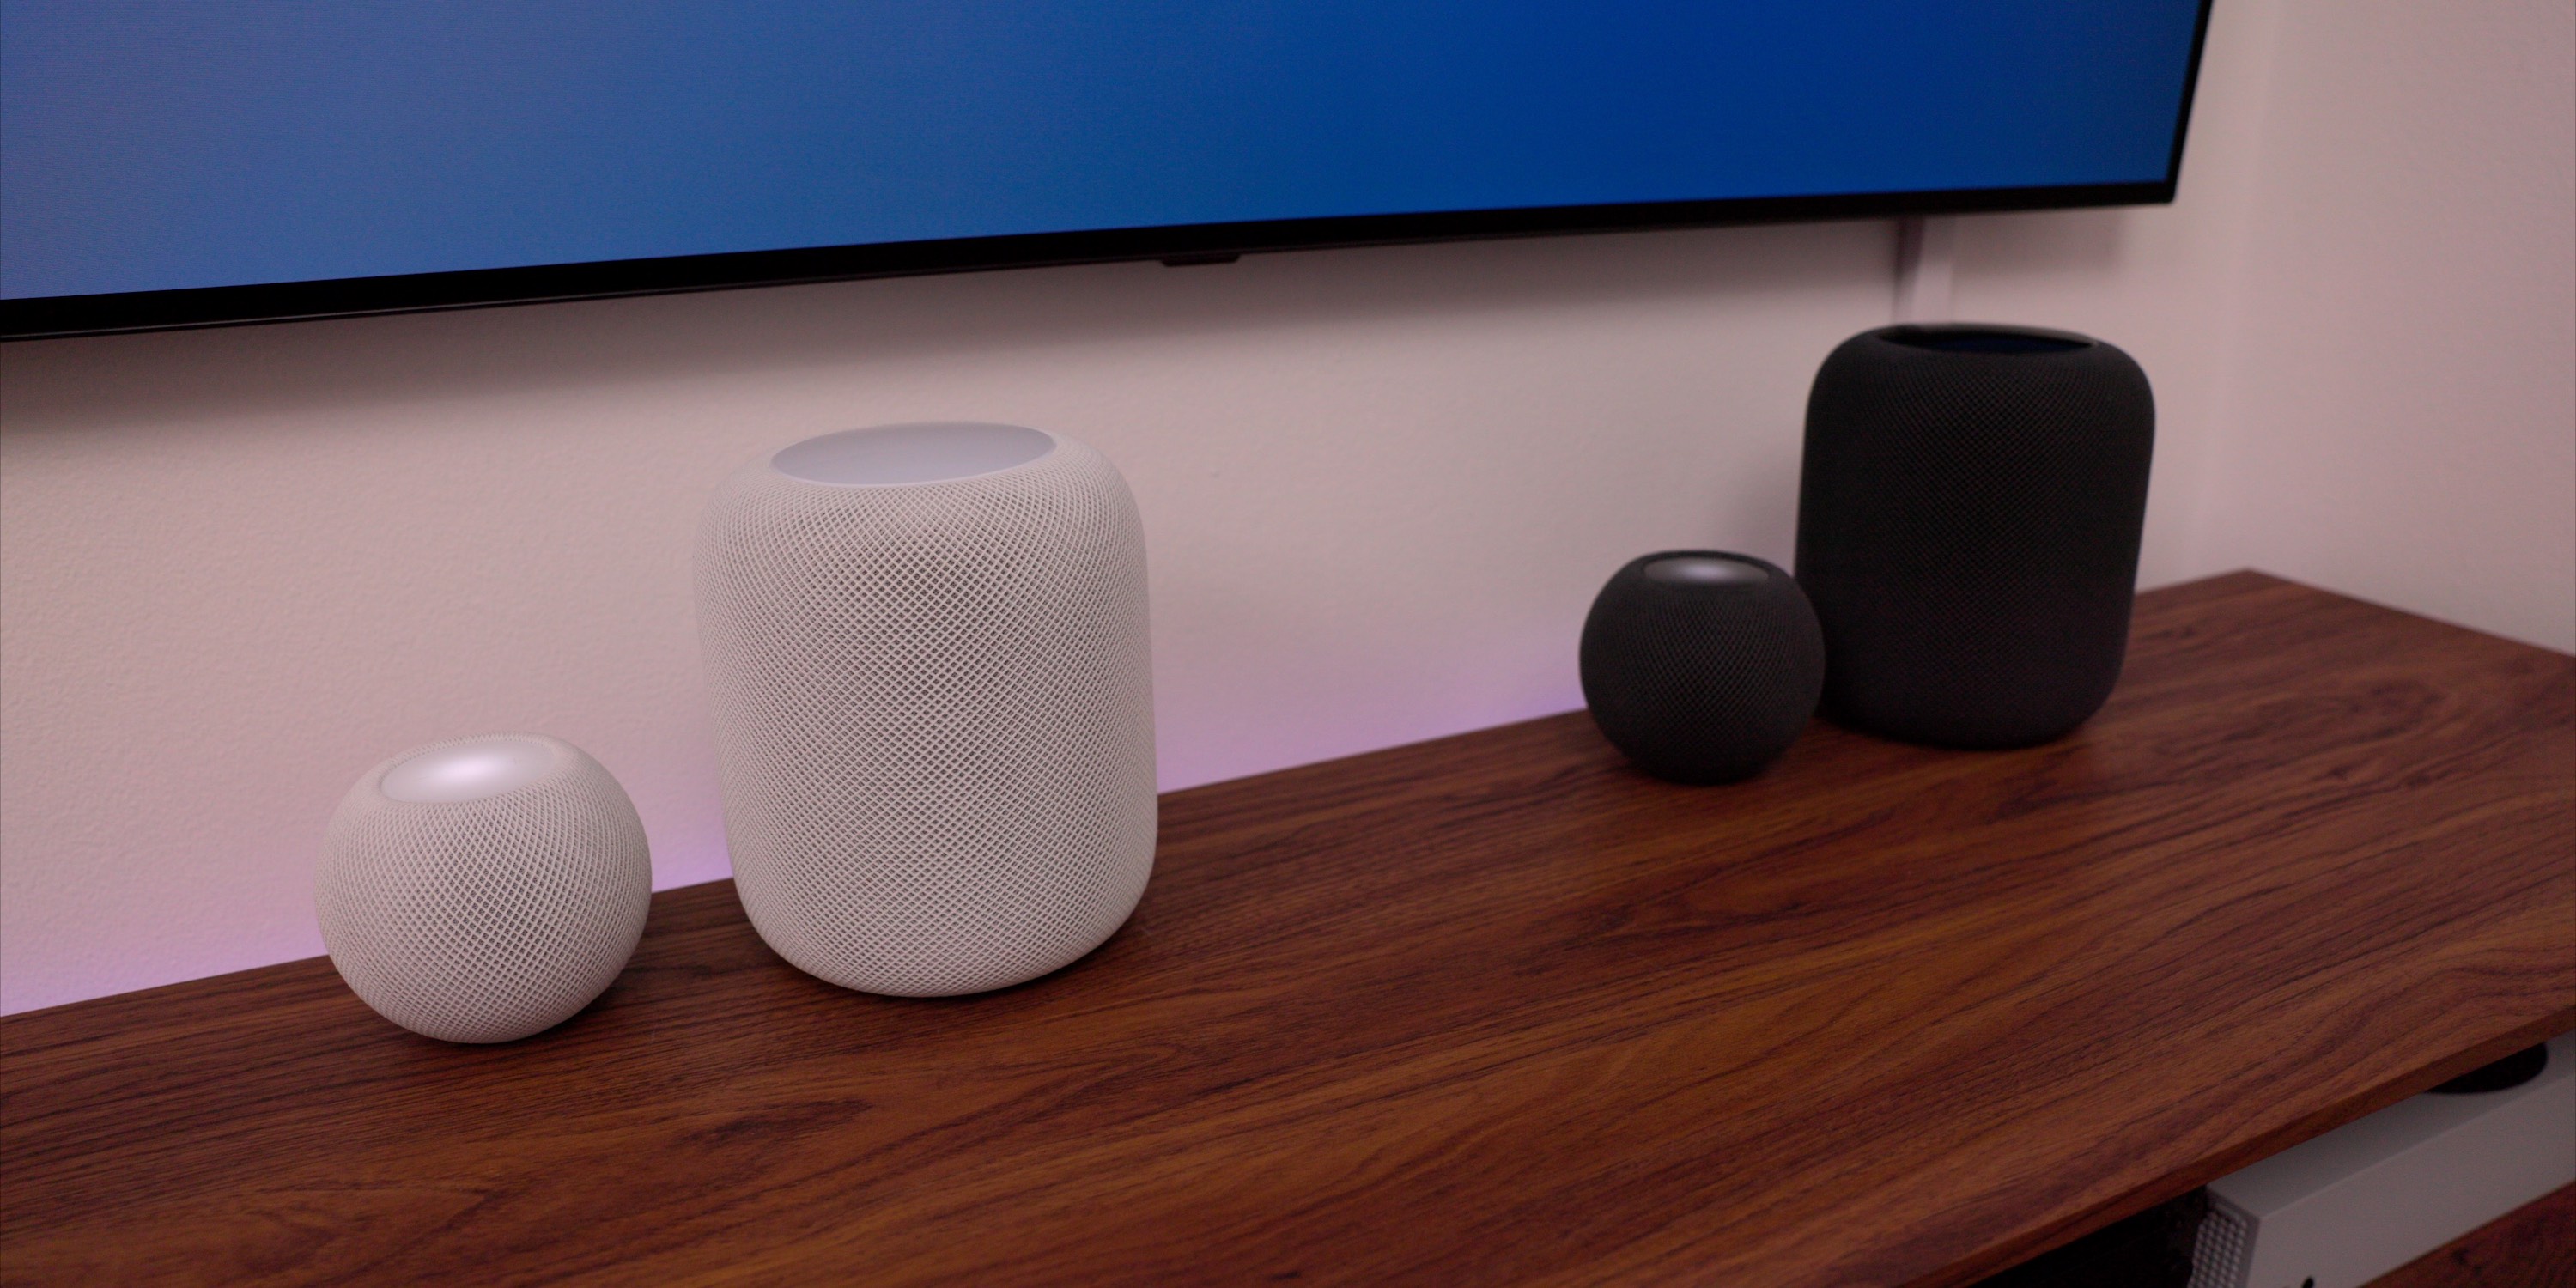 Feature request: HomePod should have a true surround mode.